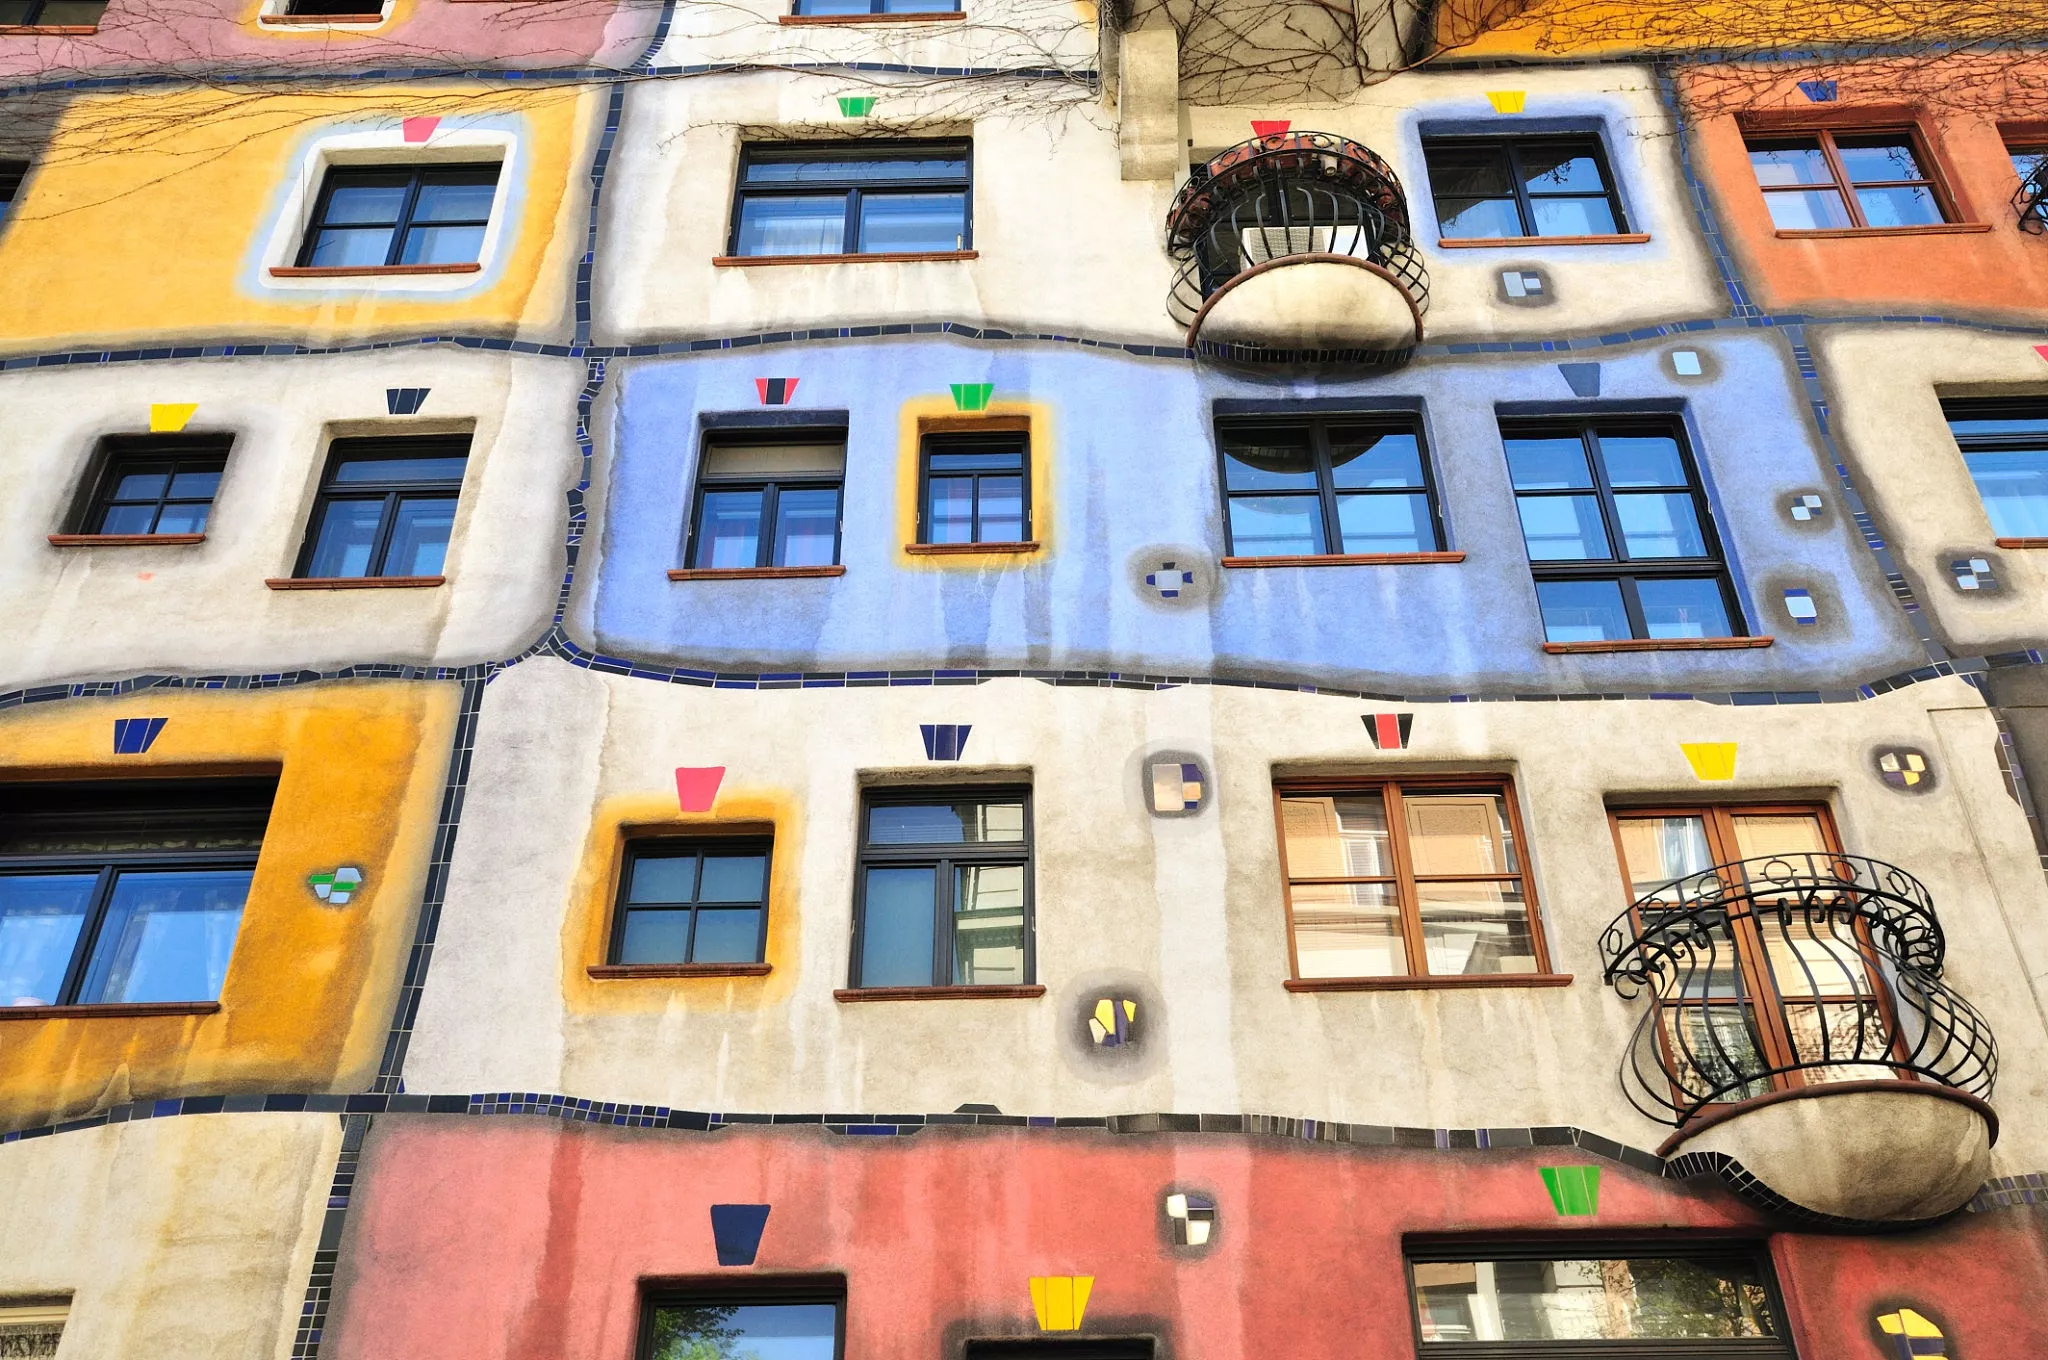 Hundertwasser House in Austria, Europe | Architecture - Rated 3.7